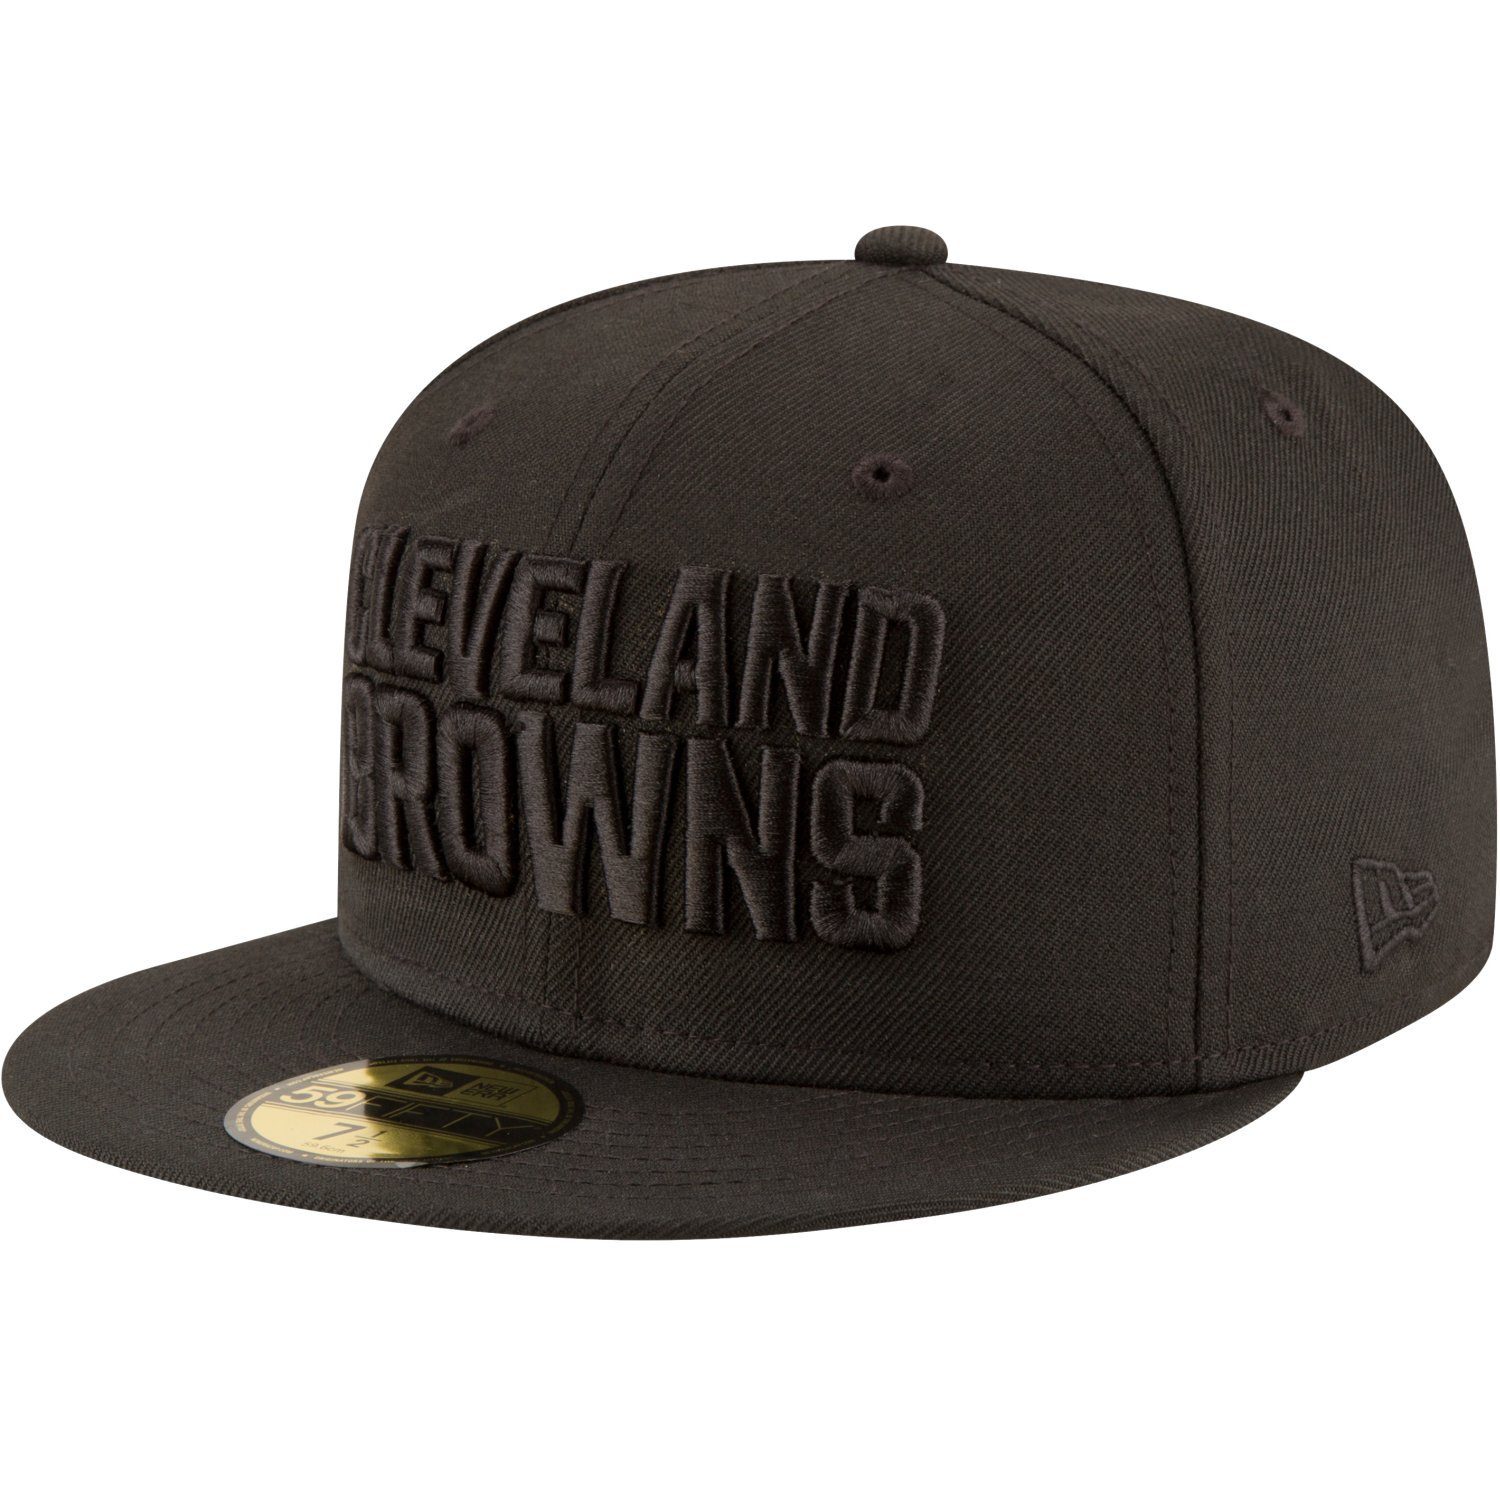 Cleveland Fitted Era Browns New Cap NFL 59Fifty